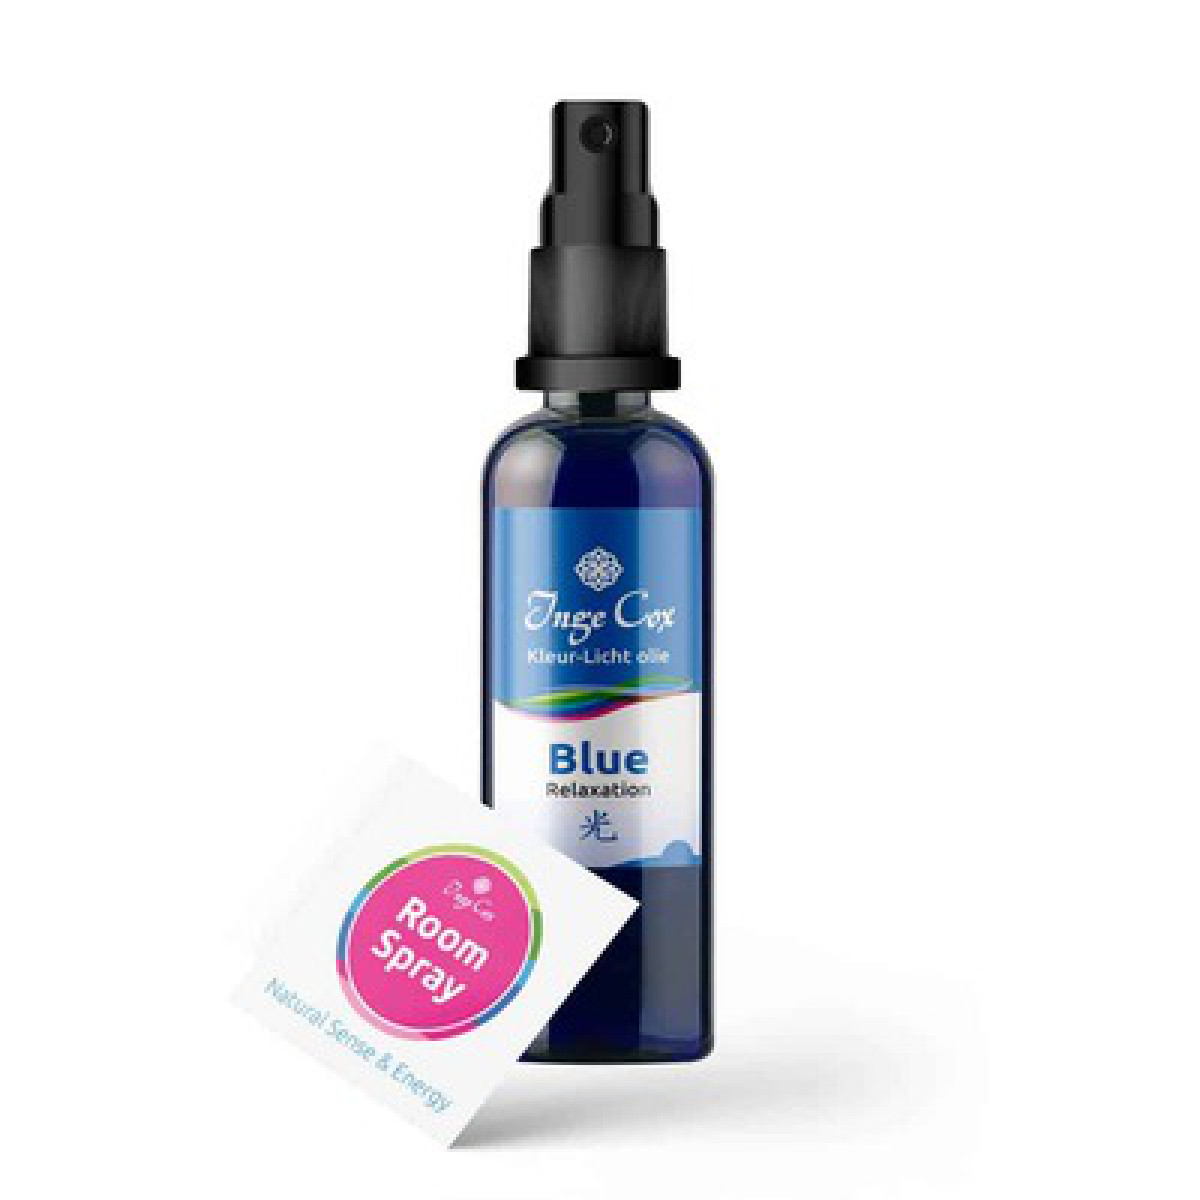 Room-spray-blue-relaxation-100ml